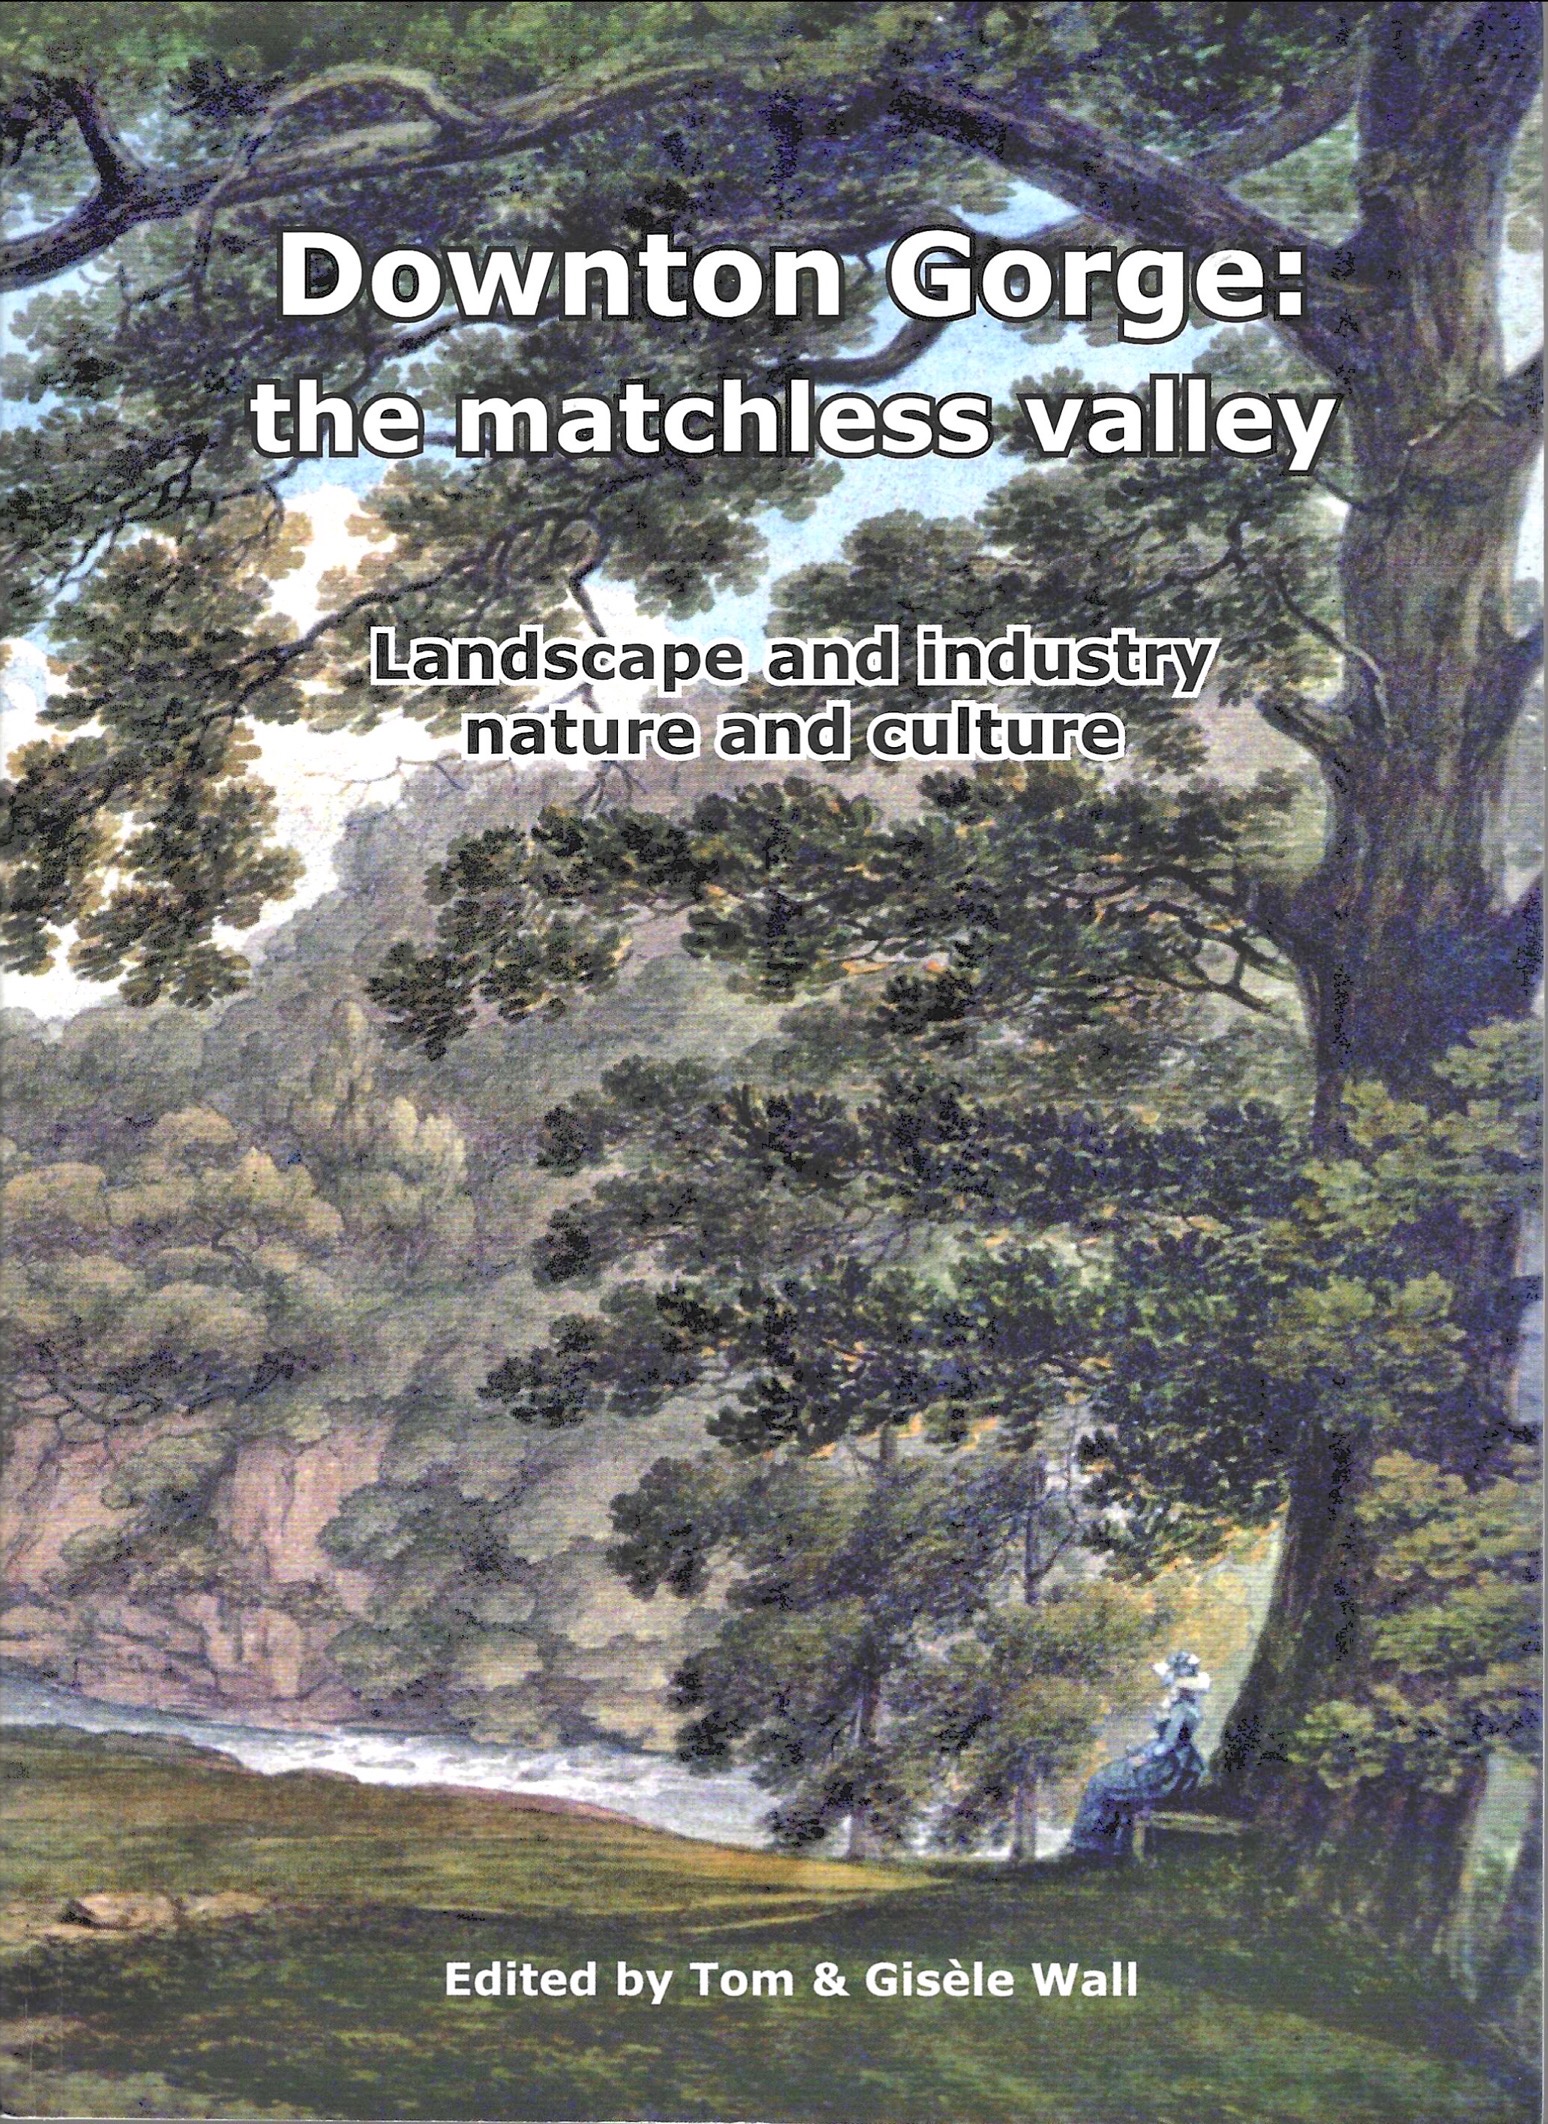 Downton Gorge: the matchless valley